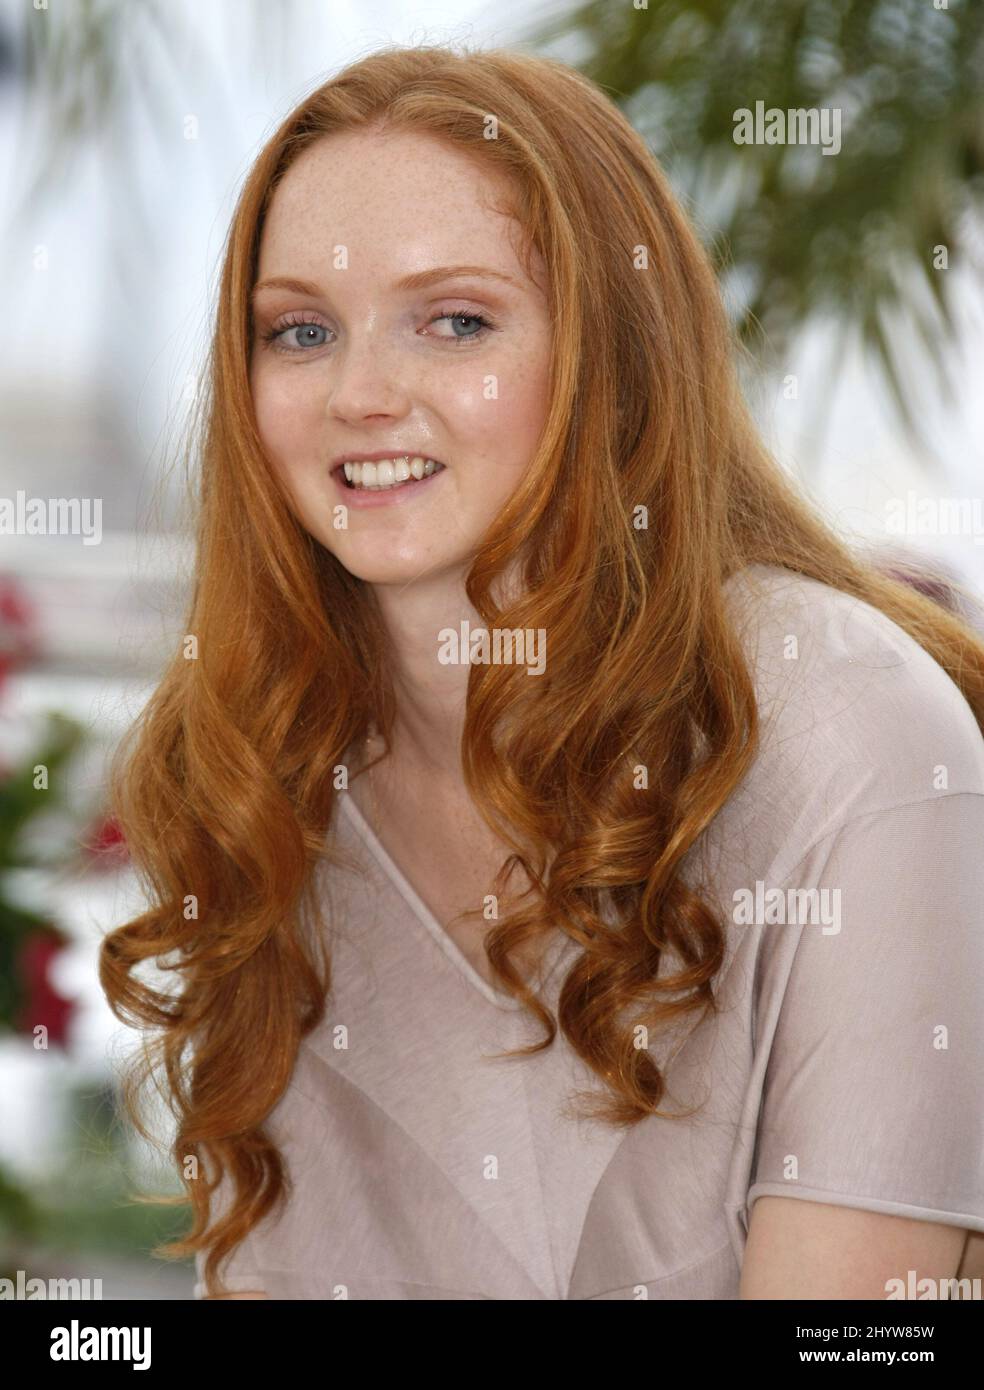 Lily Cole at a photocall for The Imaginarium of Dr Parnassus held at the Palais des Festivals, during the 62nd Festival de Film, Cannes. Stock Photo